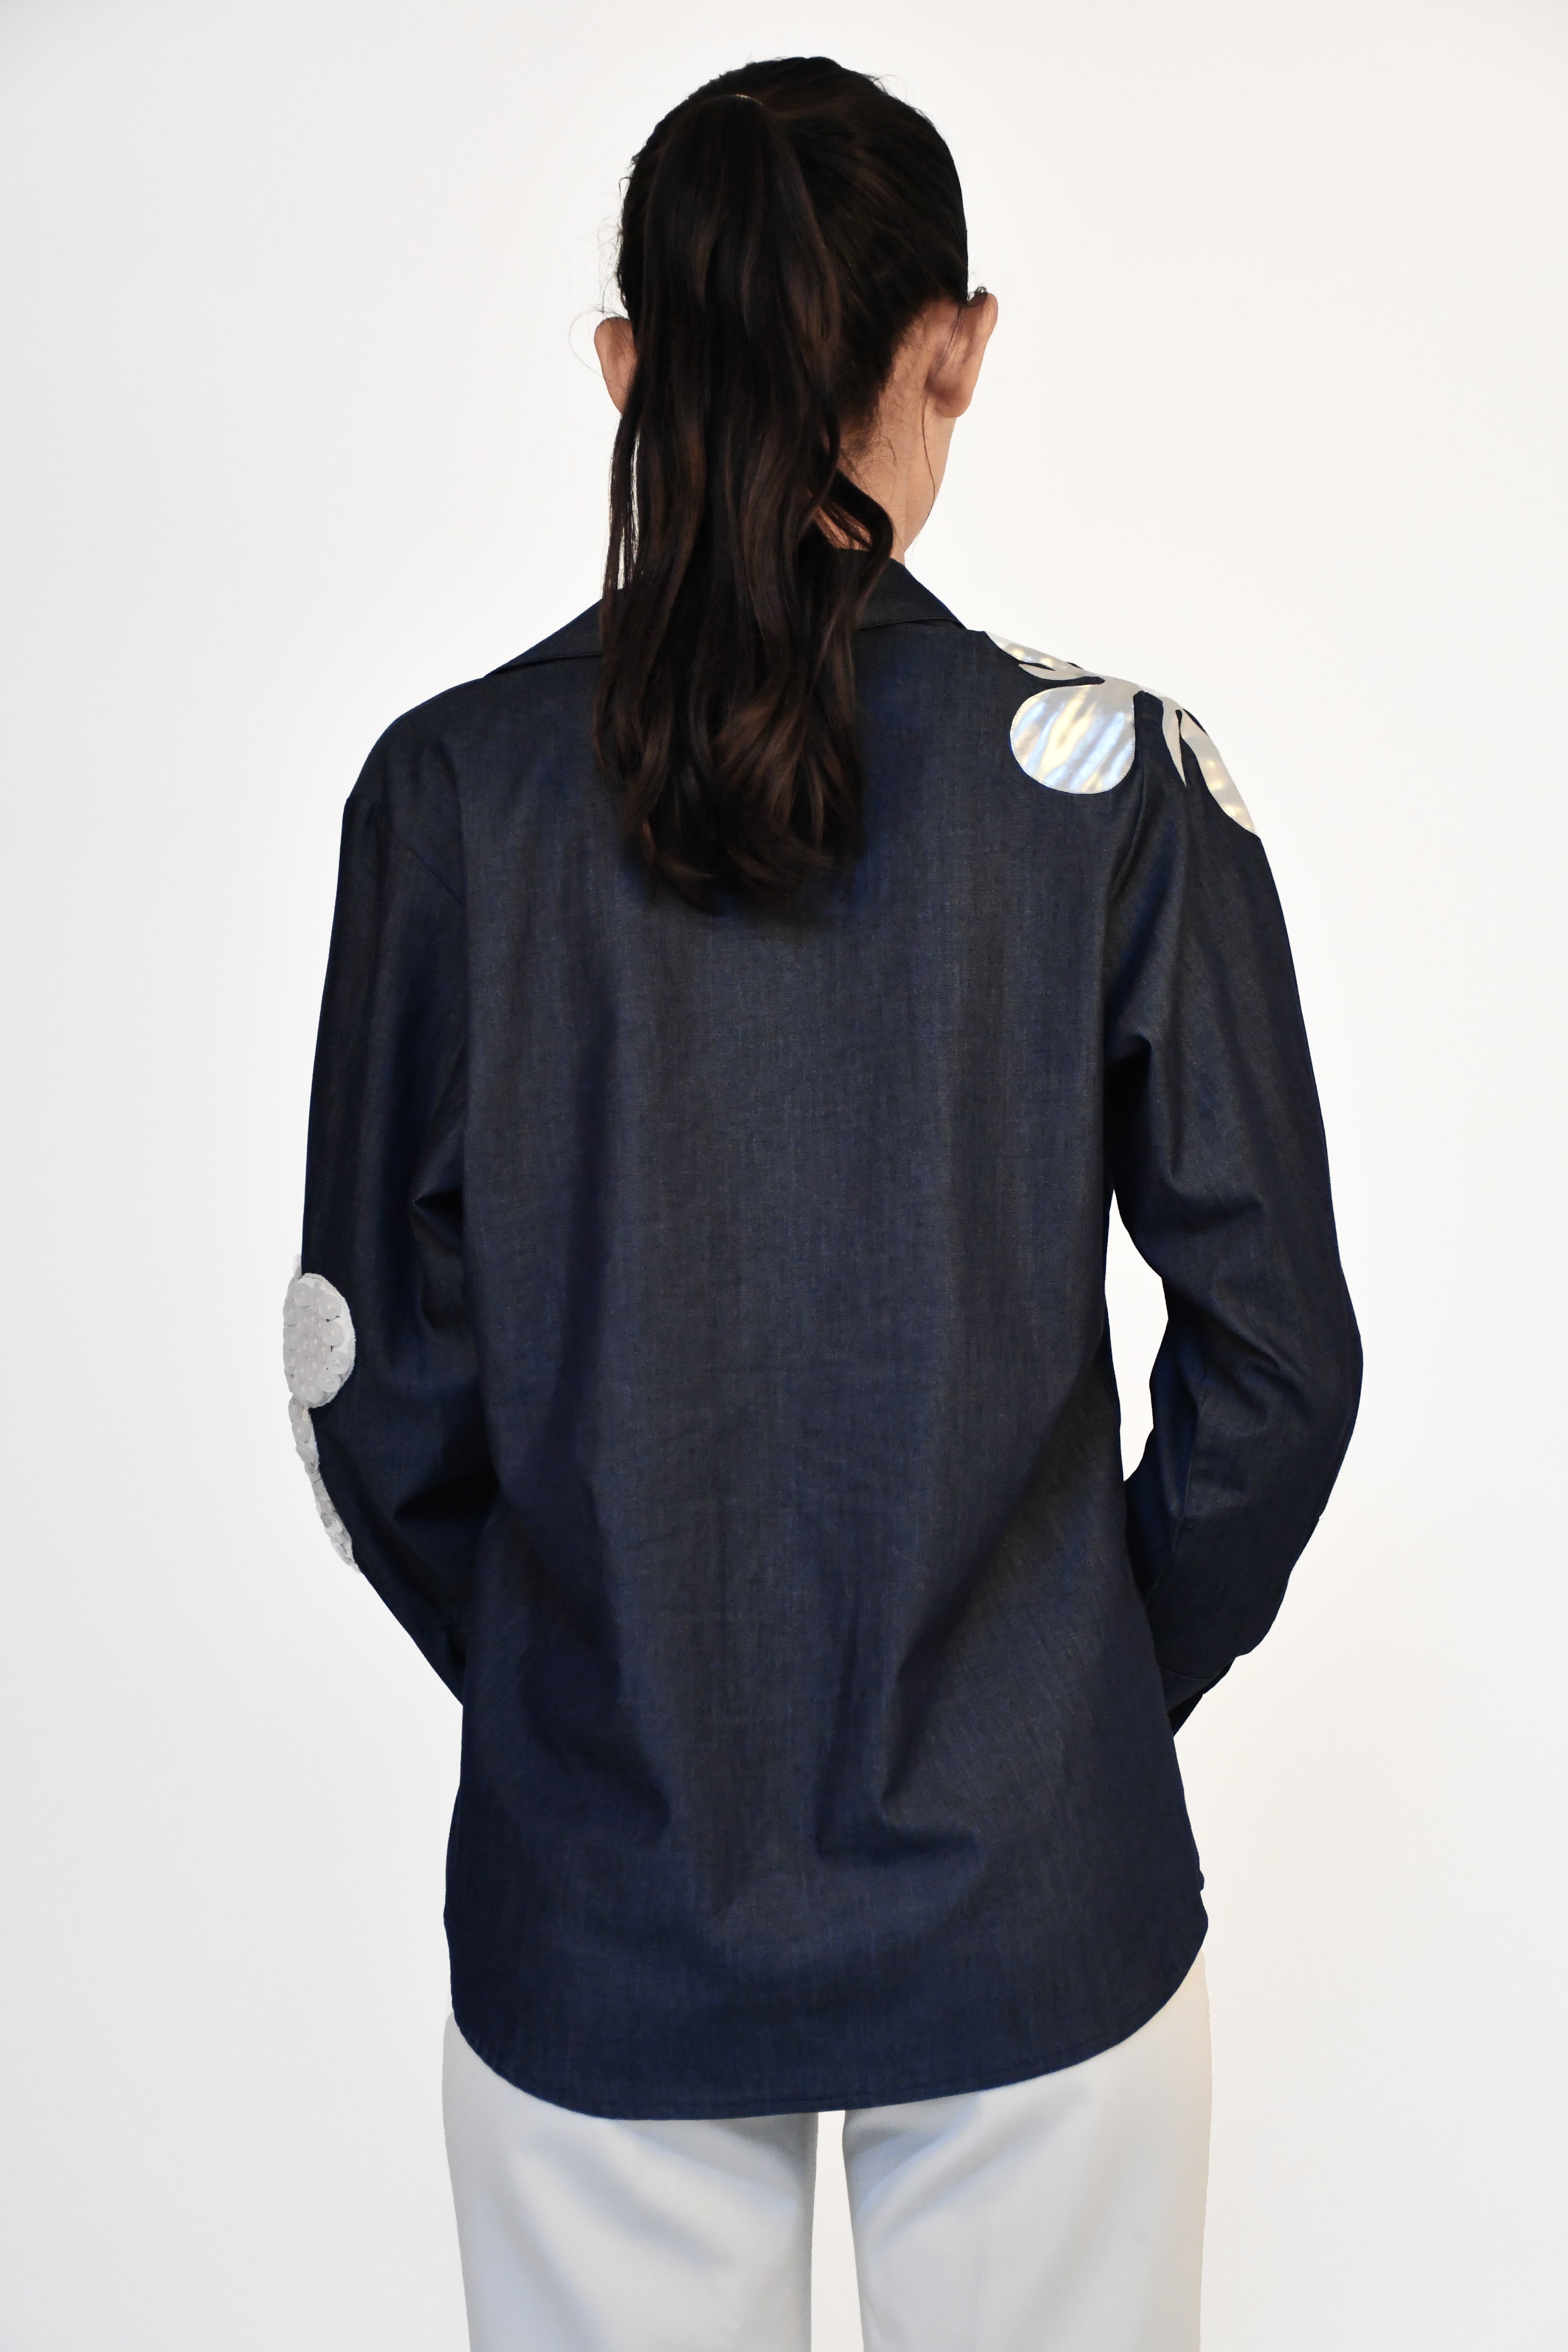 DENIM SHIRT WITH BUTTON PATCH AND SILVER LEATHER PATCH